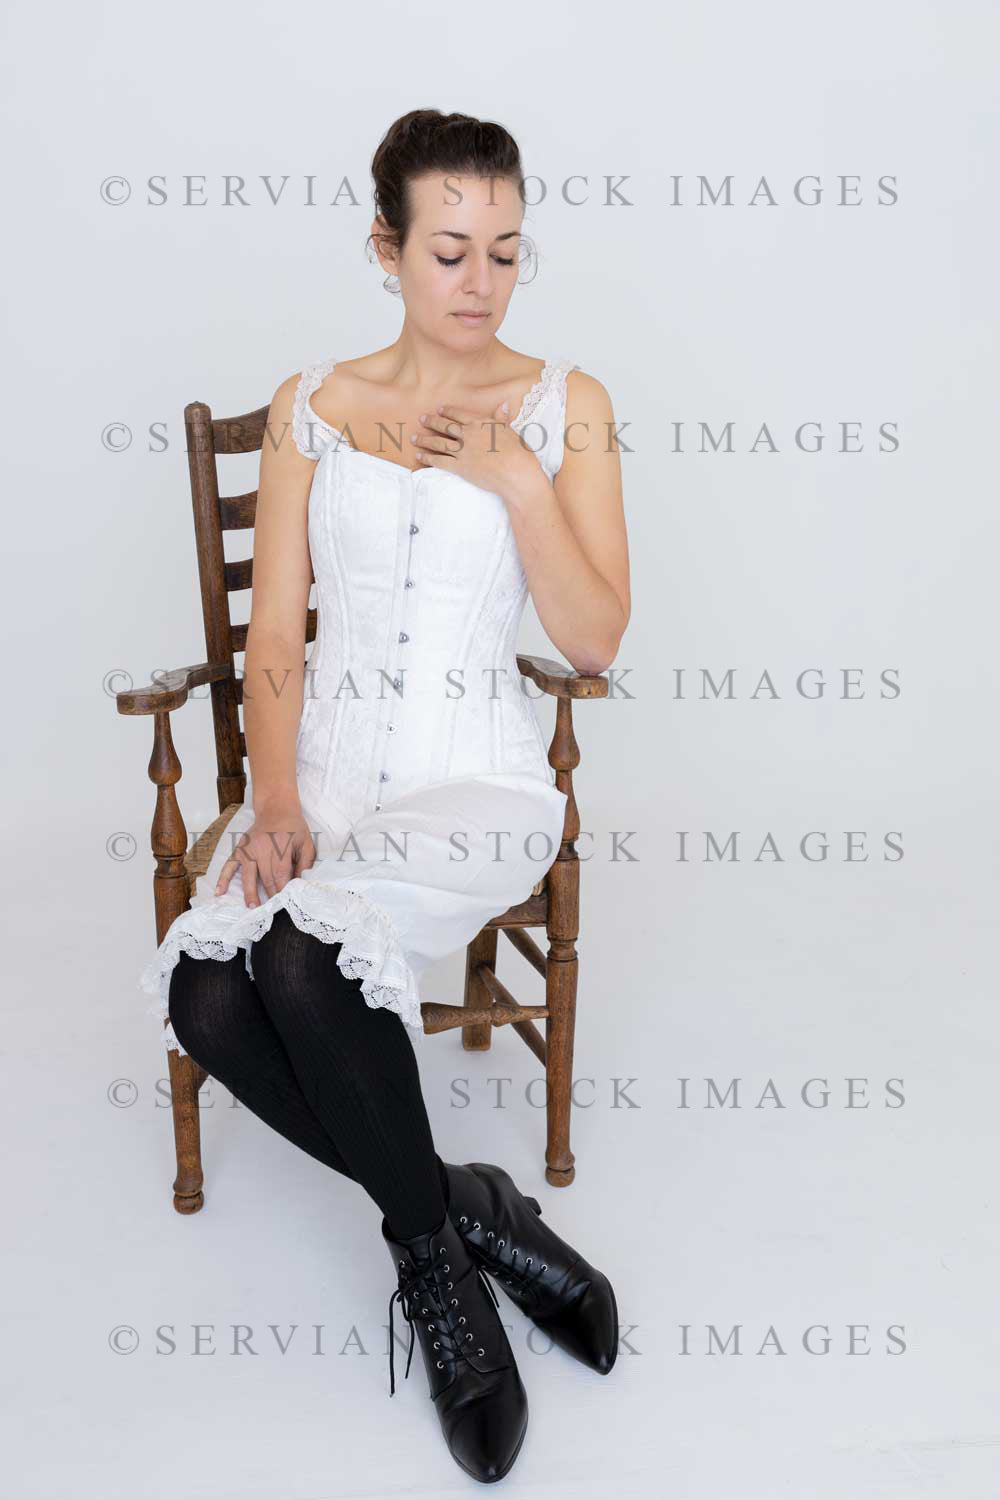 Victorian woman wearing underwear and sitting on a wooden chair against a white backdrop (Emma 2329)